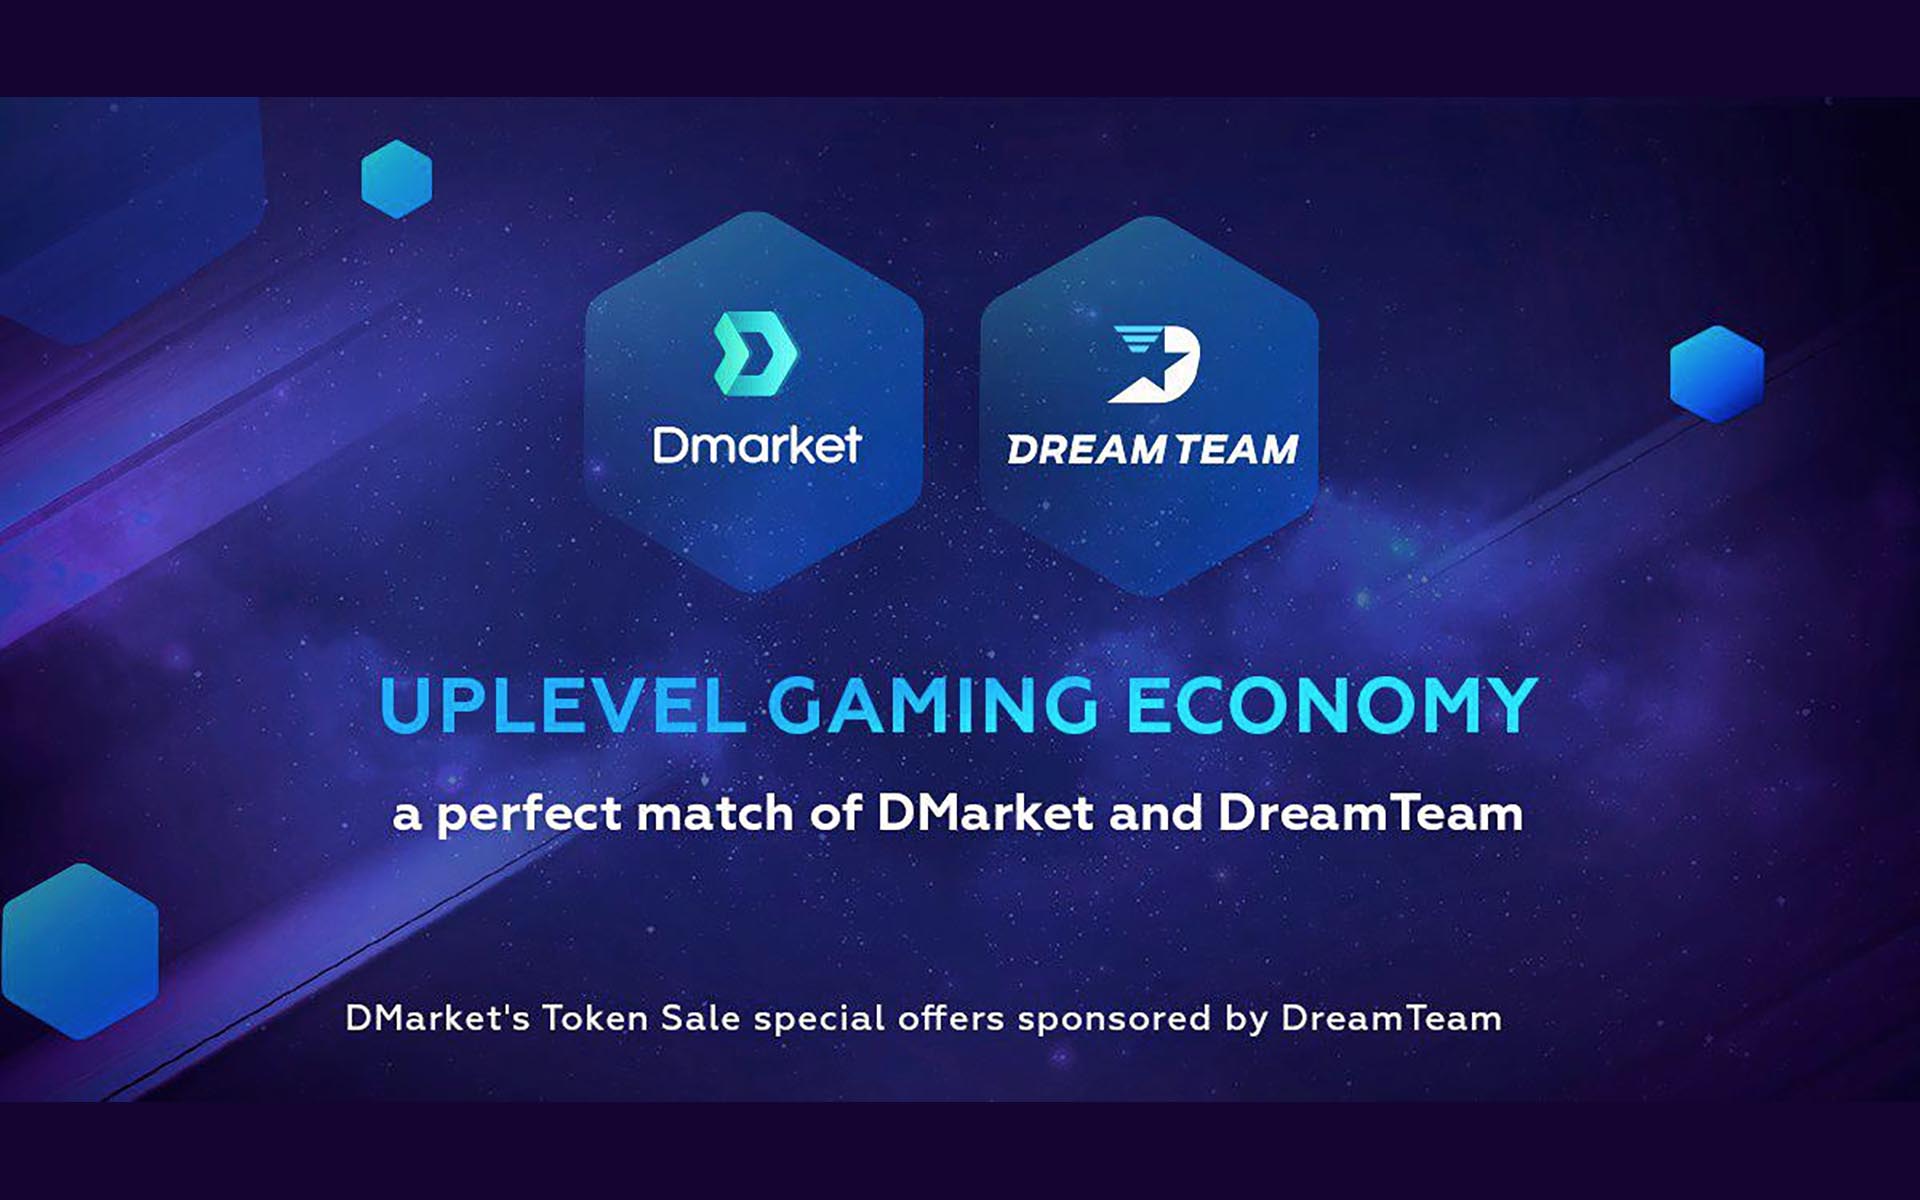 DMarket and DreamTeam Become Partners and Announce Special Offers for Token Sale